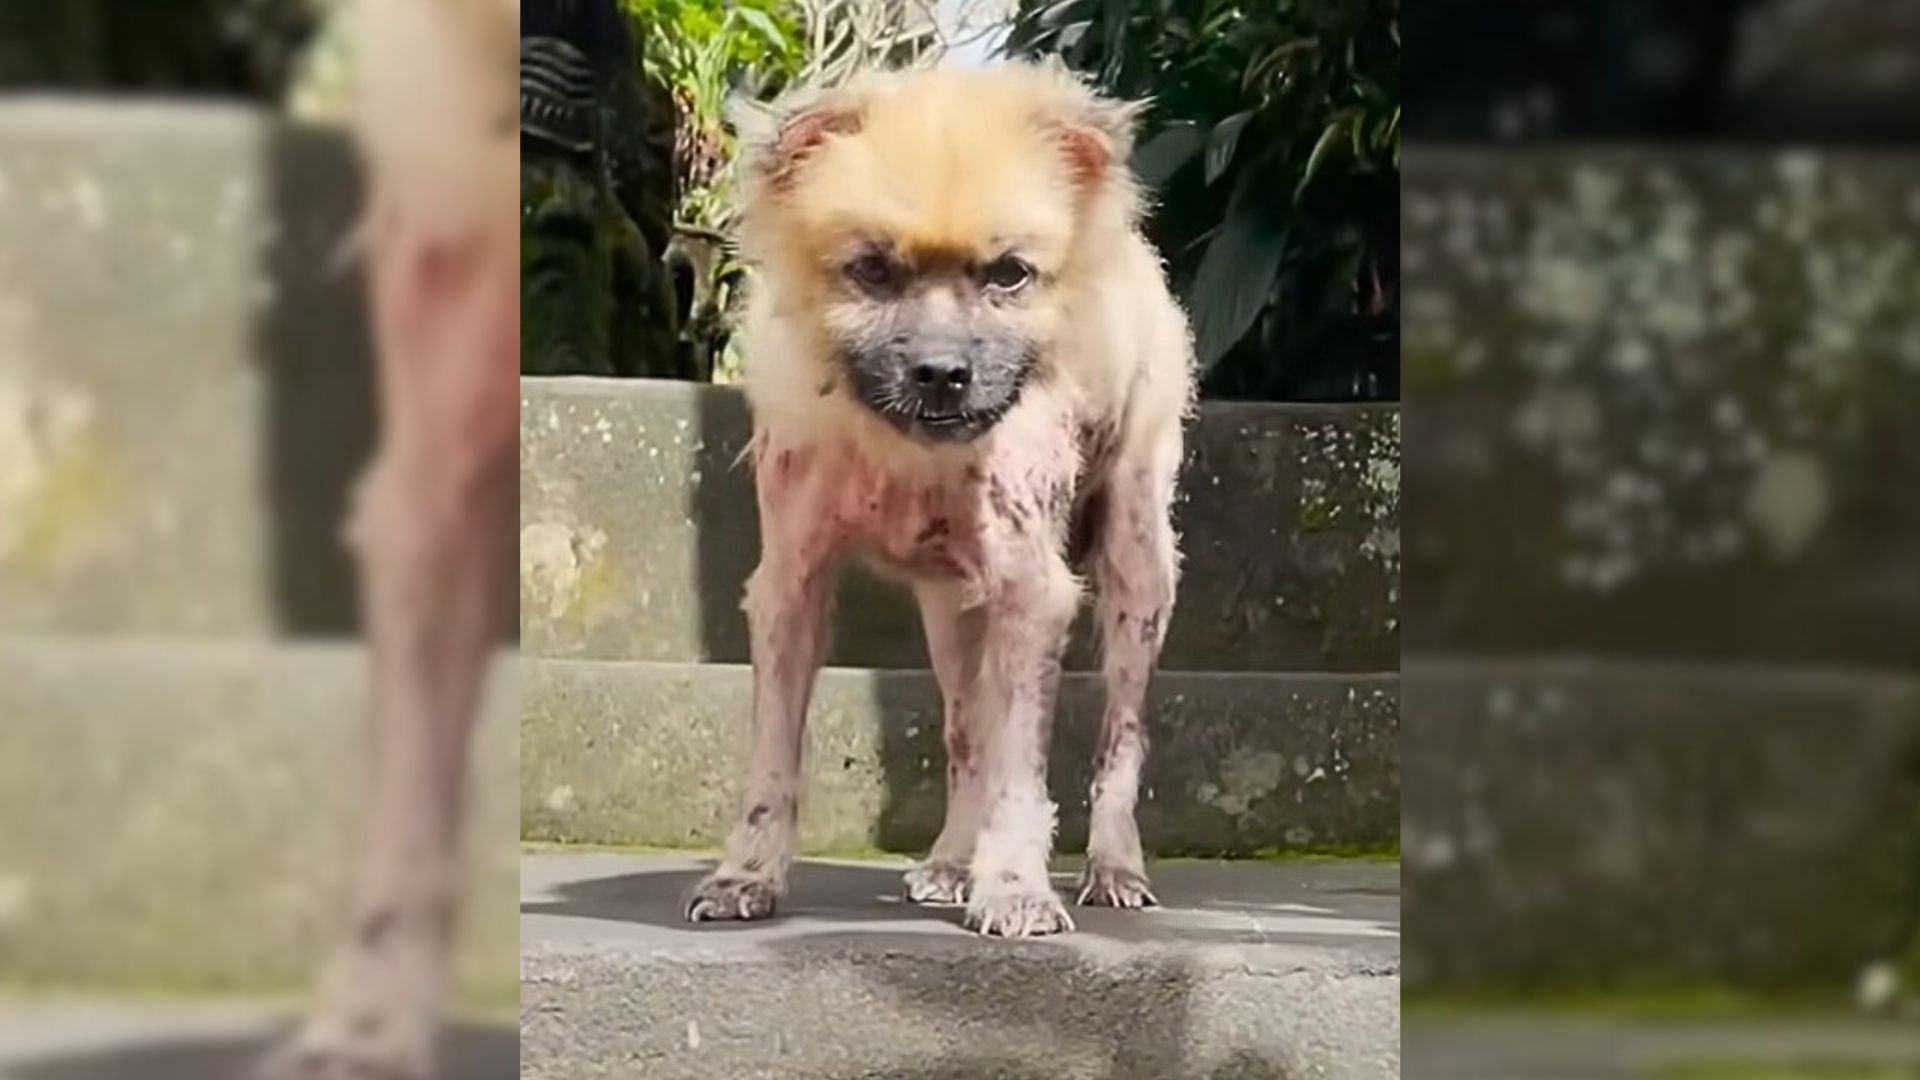 Neglected Dog Keeps Peeking Through The Bars Of His Cage, Pleading To Be Rescued